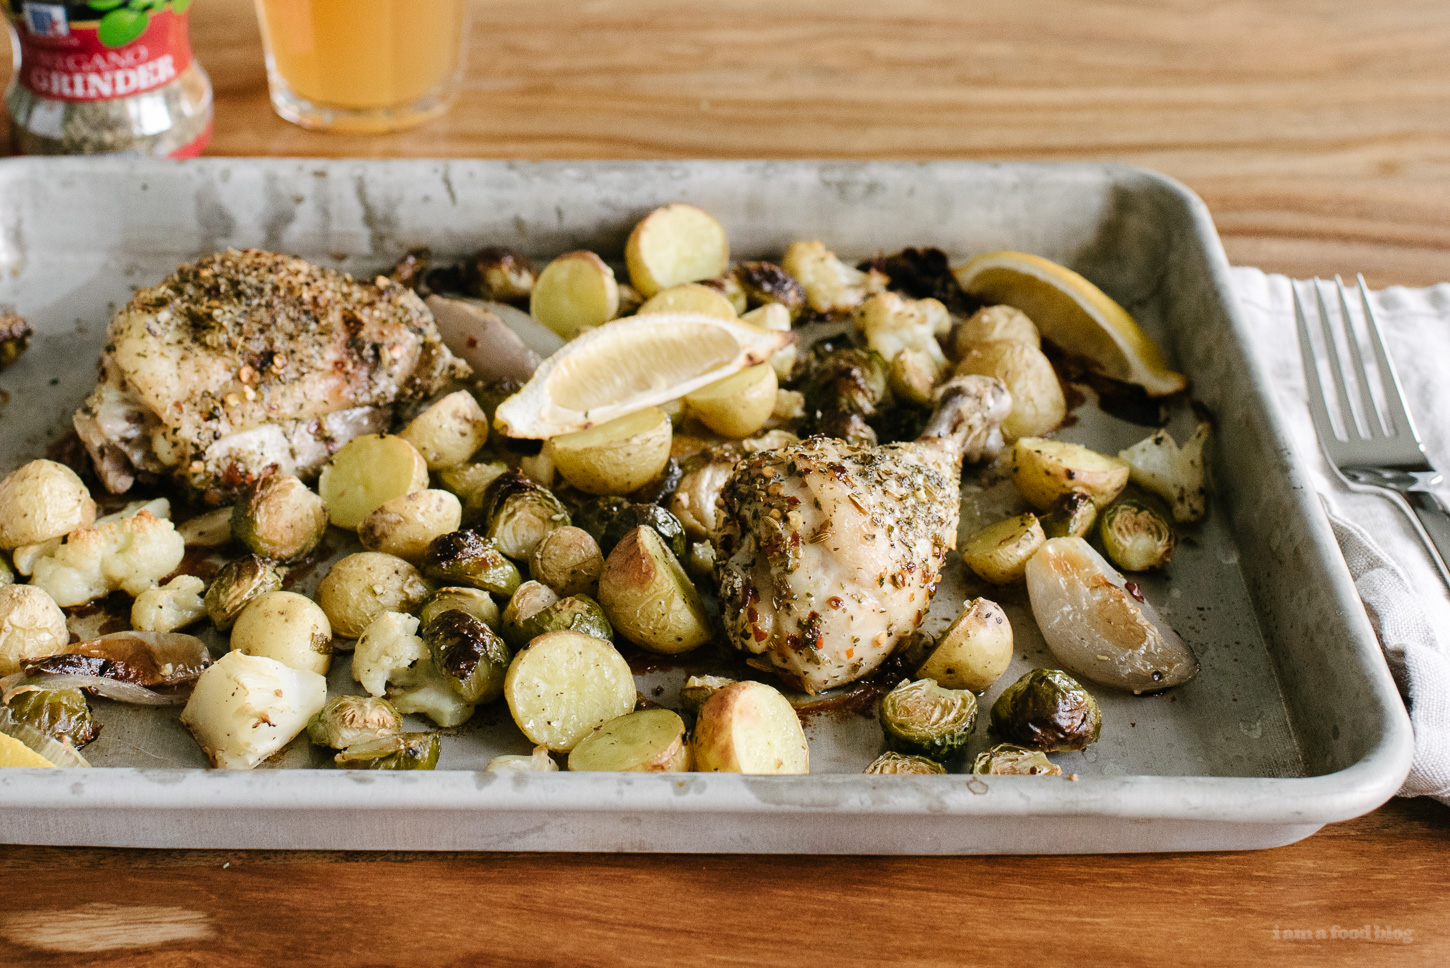 Herb Crusted Roasted Chicken Sheet Pan Supper - www.iamafoodblog.com